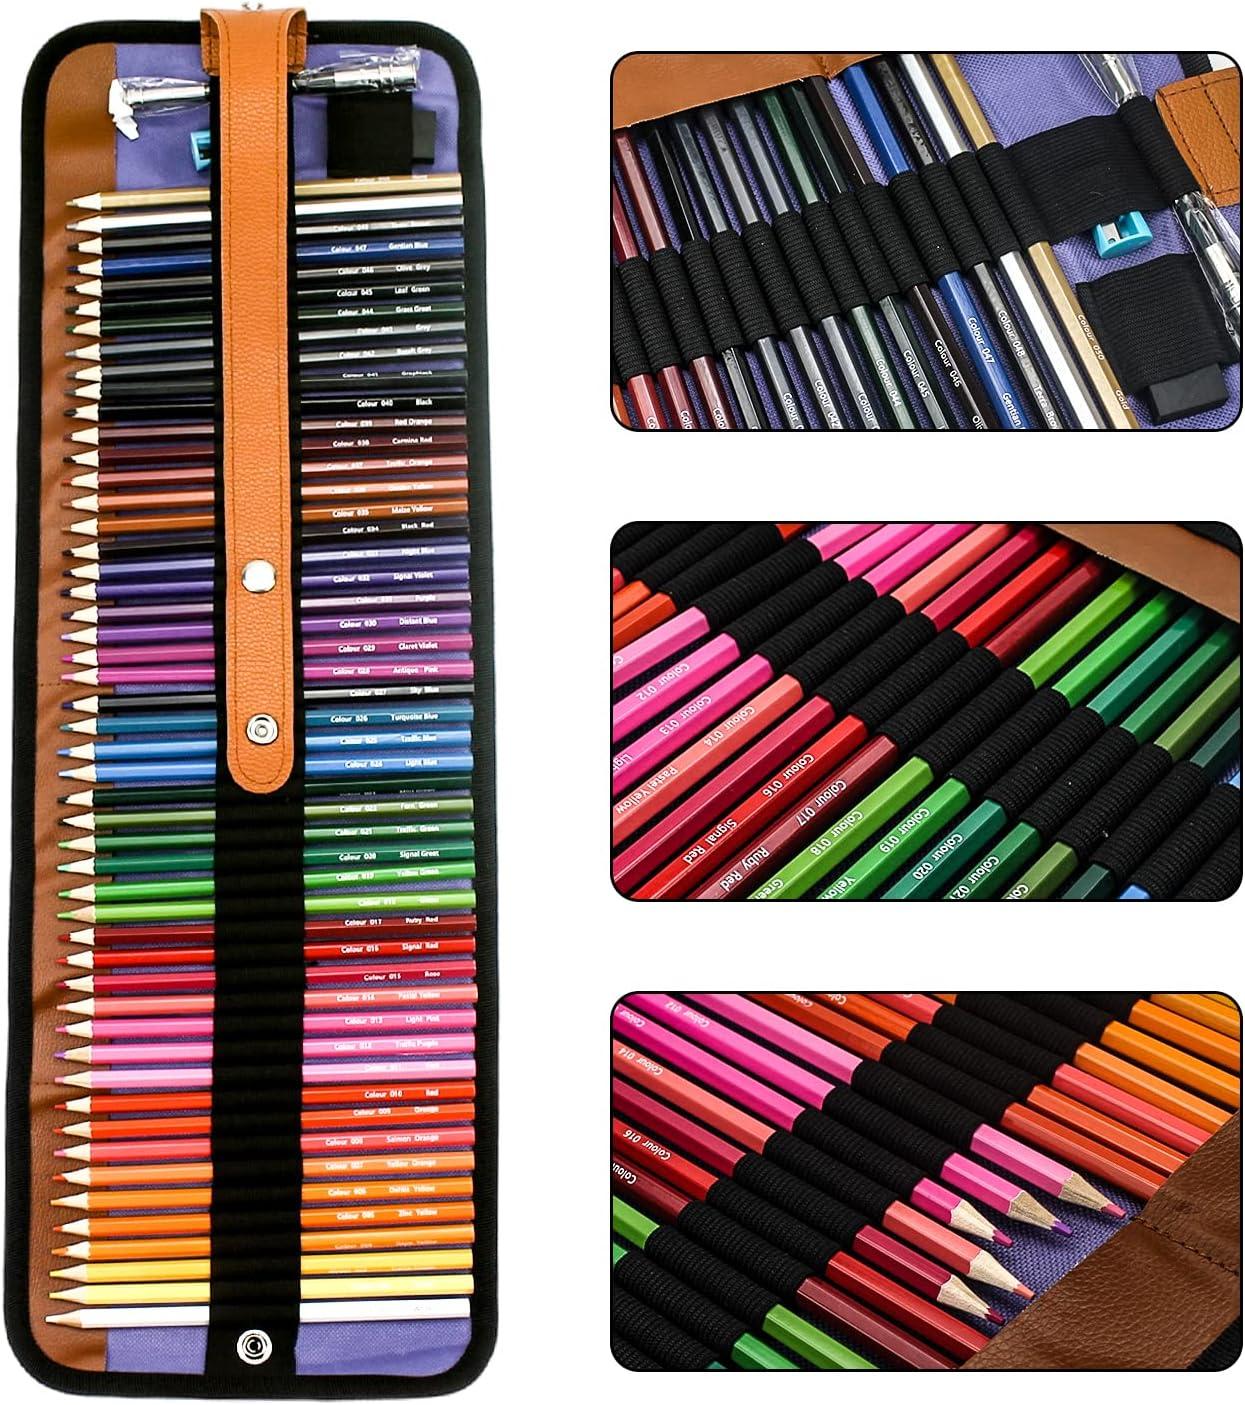 XingFu Tree Colored Pencils Set with Canvas Wrap,Drawing Supplies